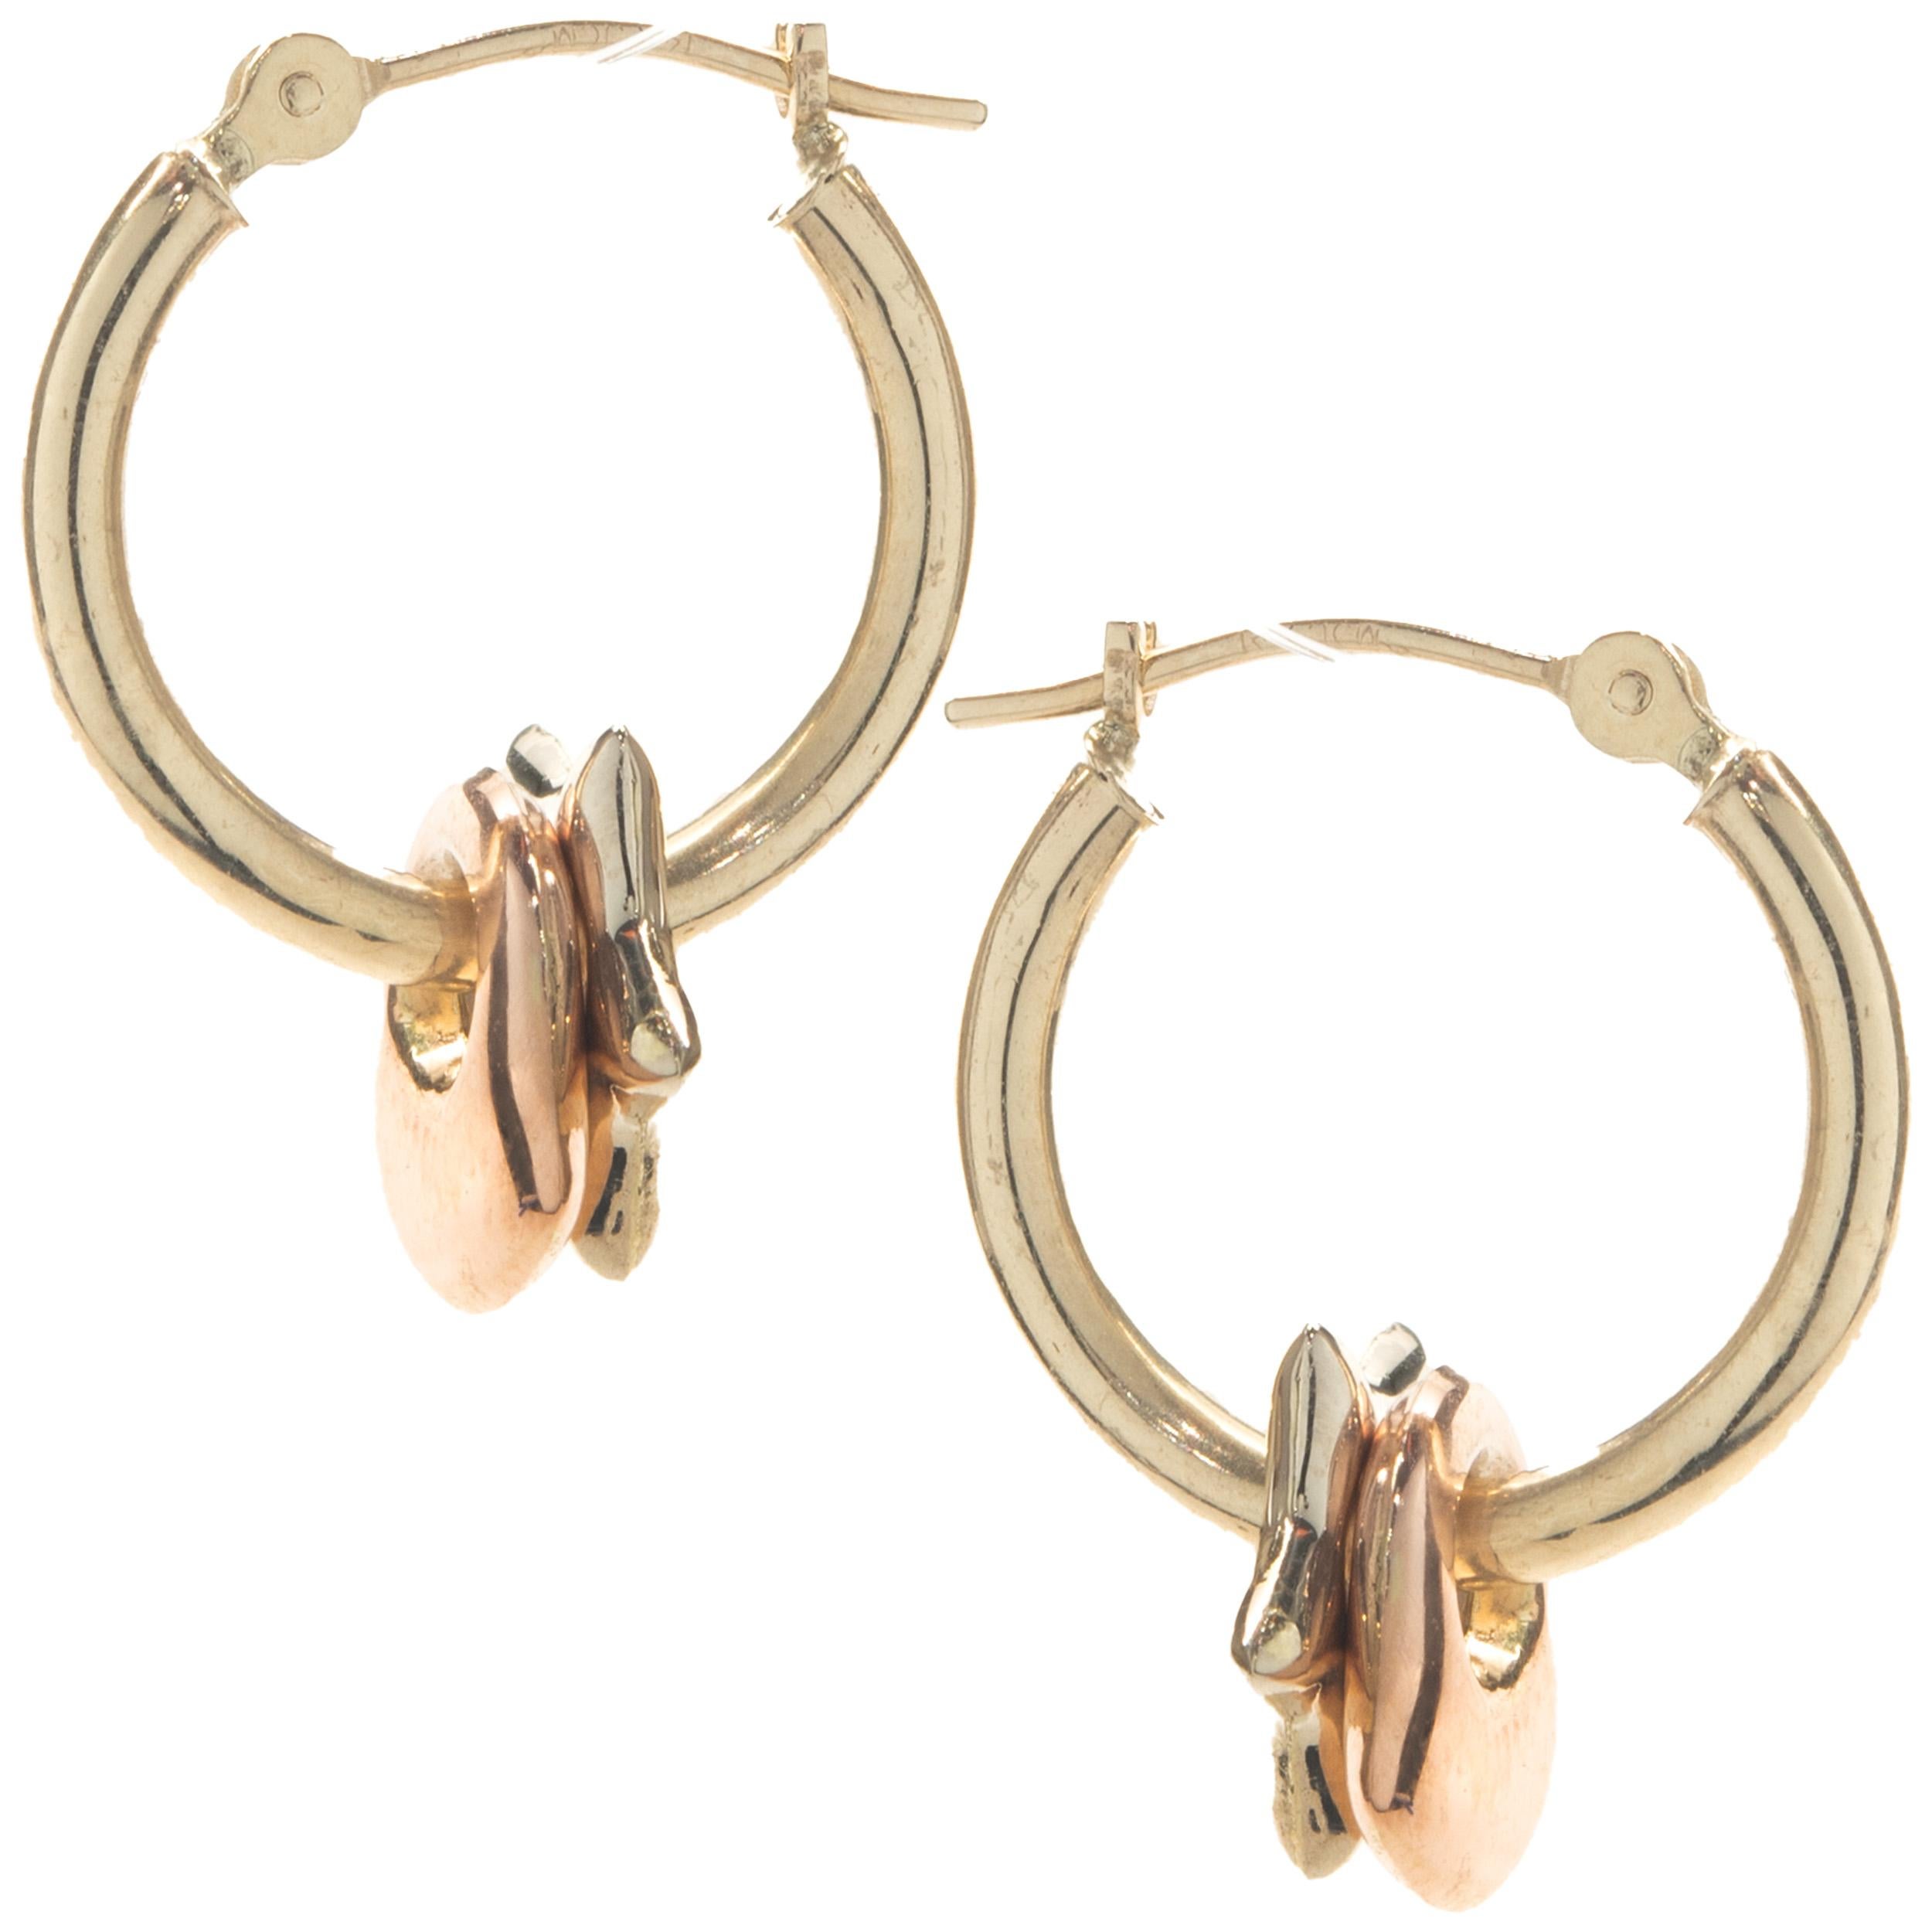 Material: 14K yellow gold
Dimensions: earrings measure 17mm in length
Weight:  1.30 grams